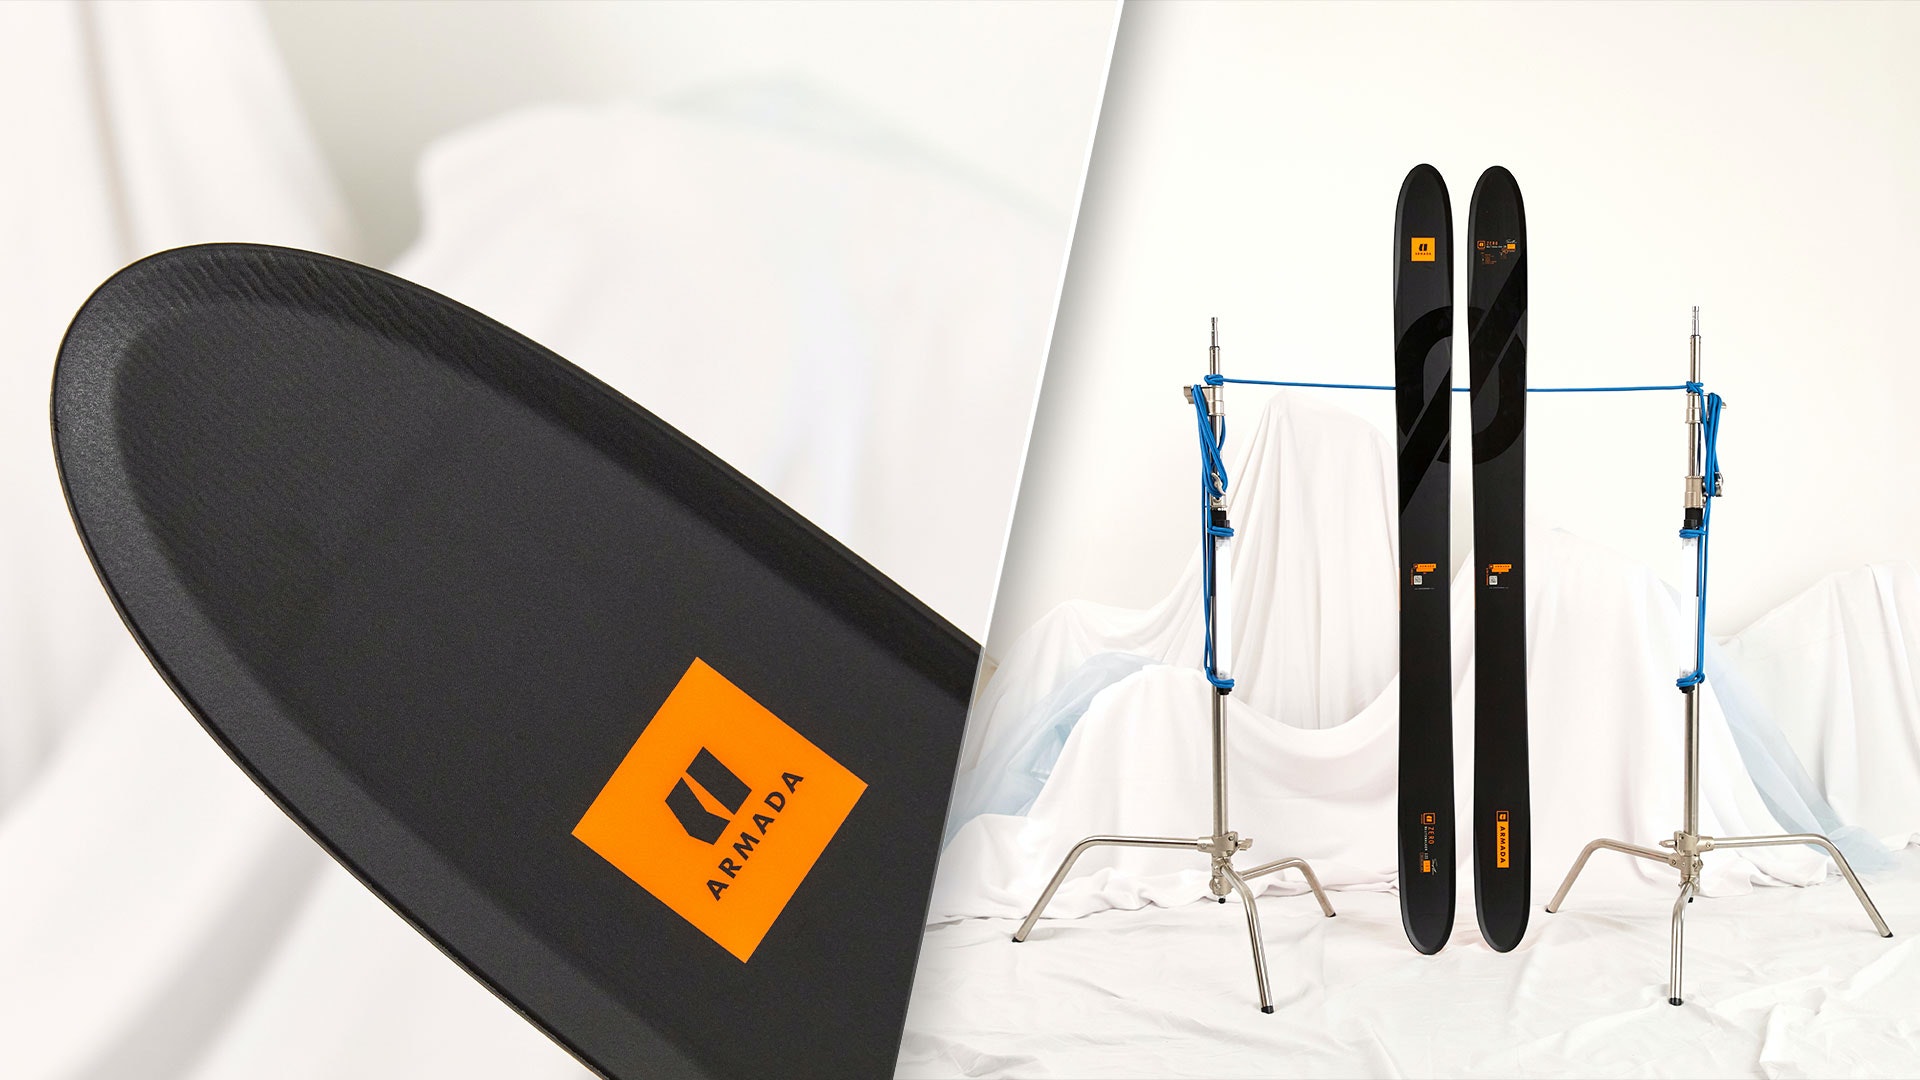 The Best Powder Skis | Skis That Offer Maximum Floatation For The Deep Days